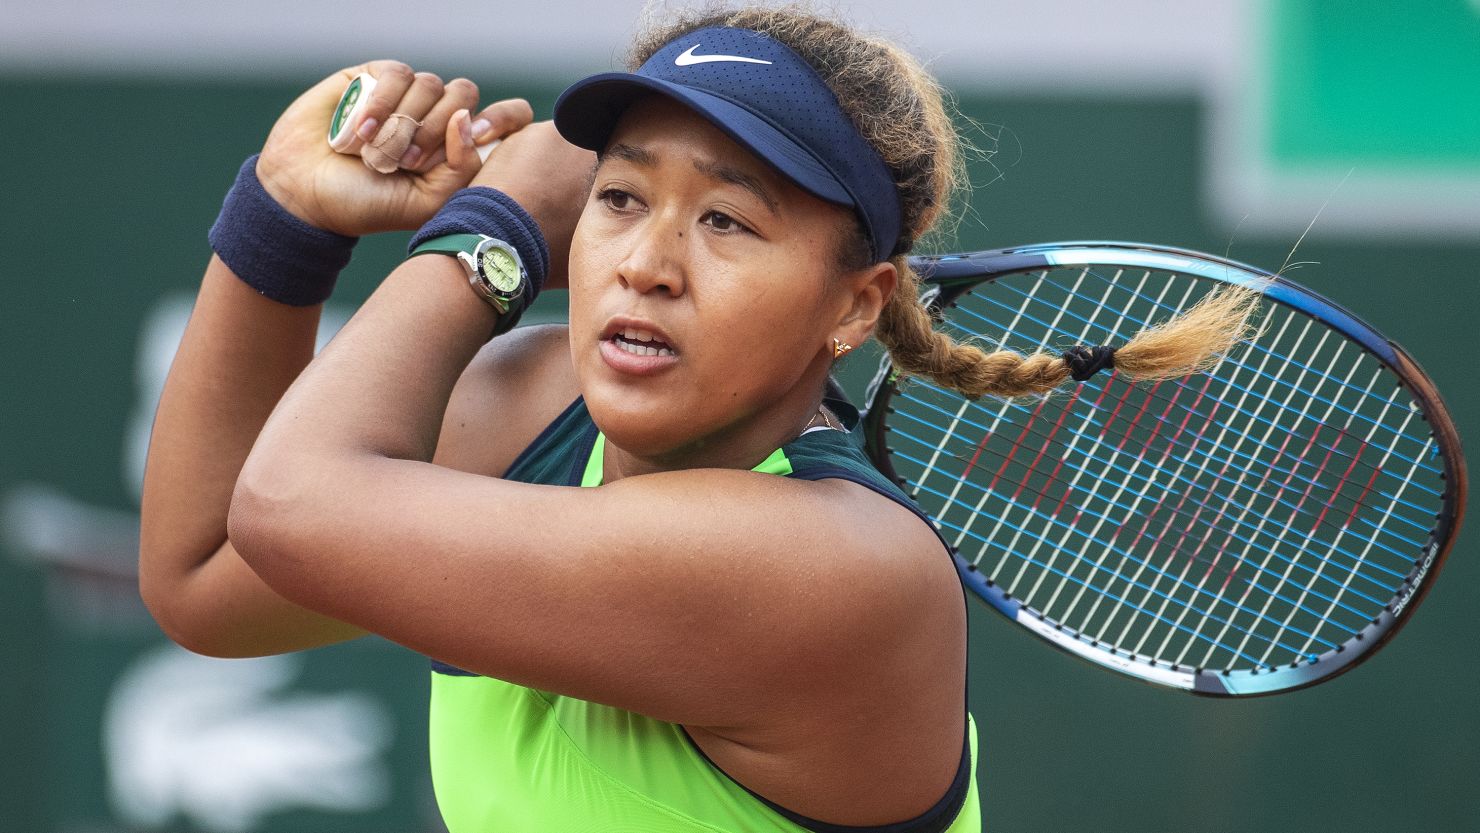 Naomi Osaka in action against Amanda Anisimova during the French Open in May.